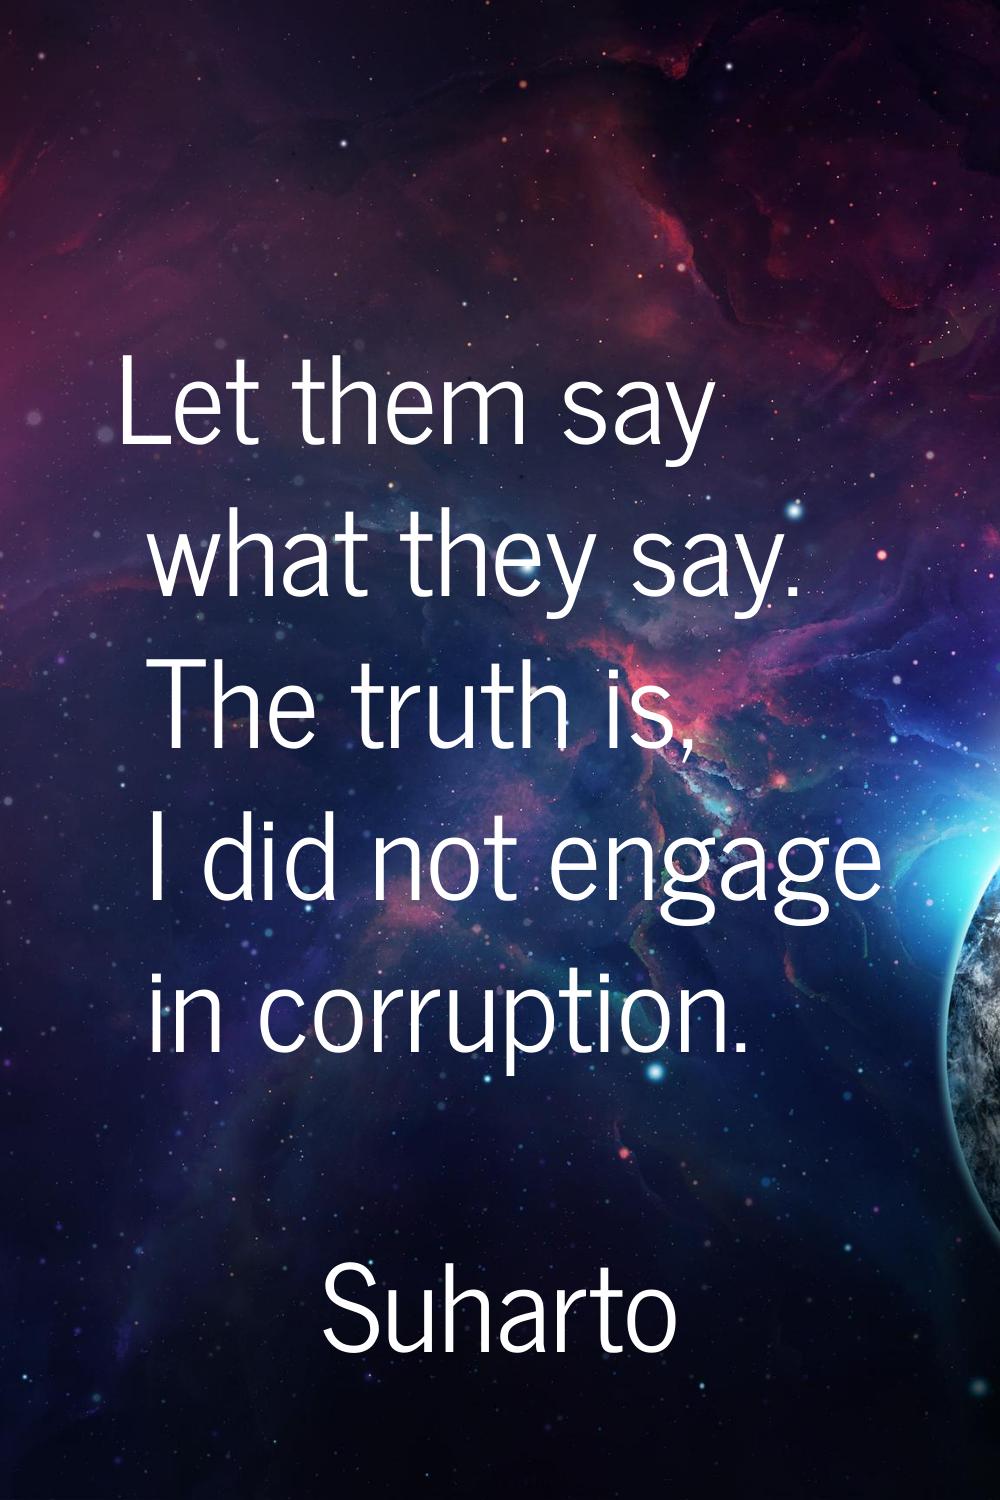 Let them say what they say. The truth is, I did not engage in corruption.